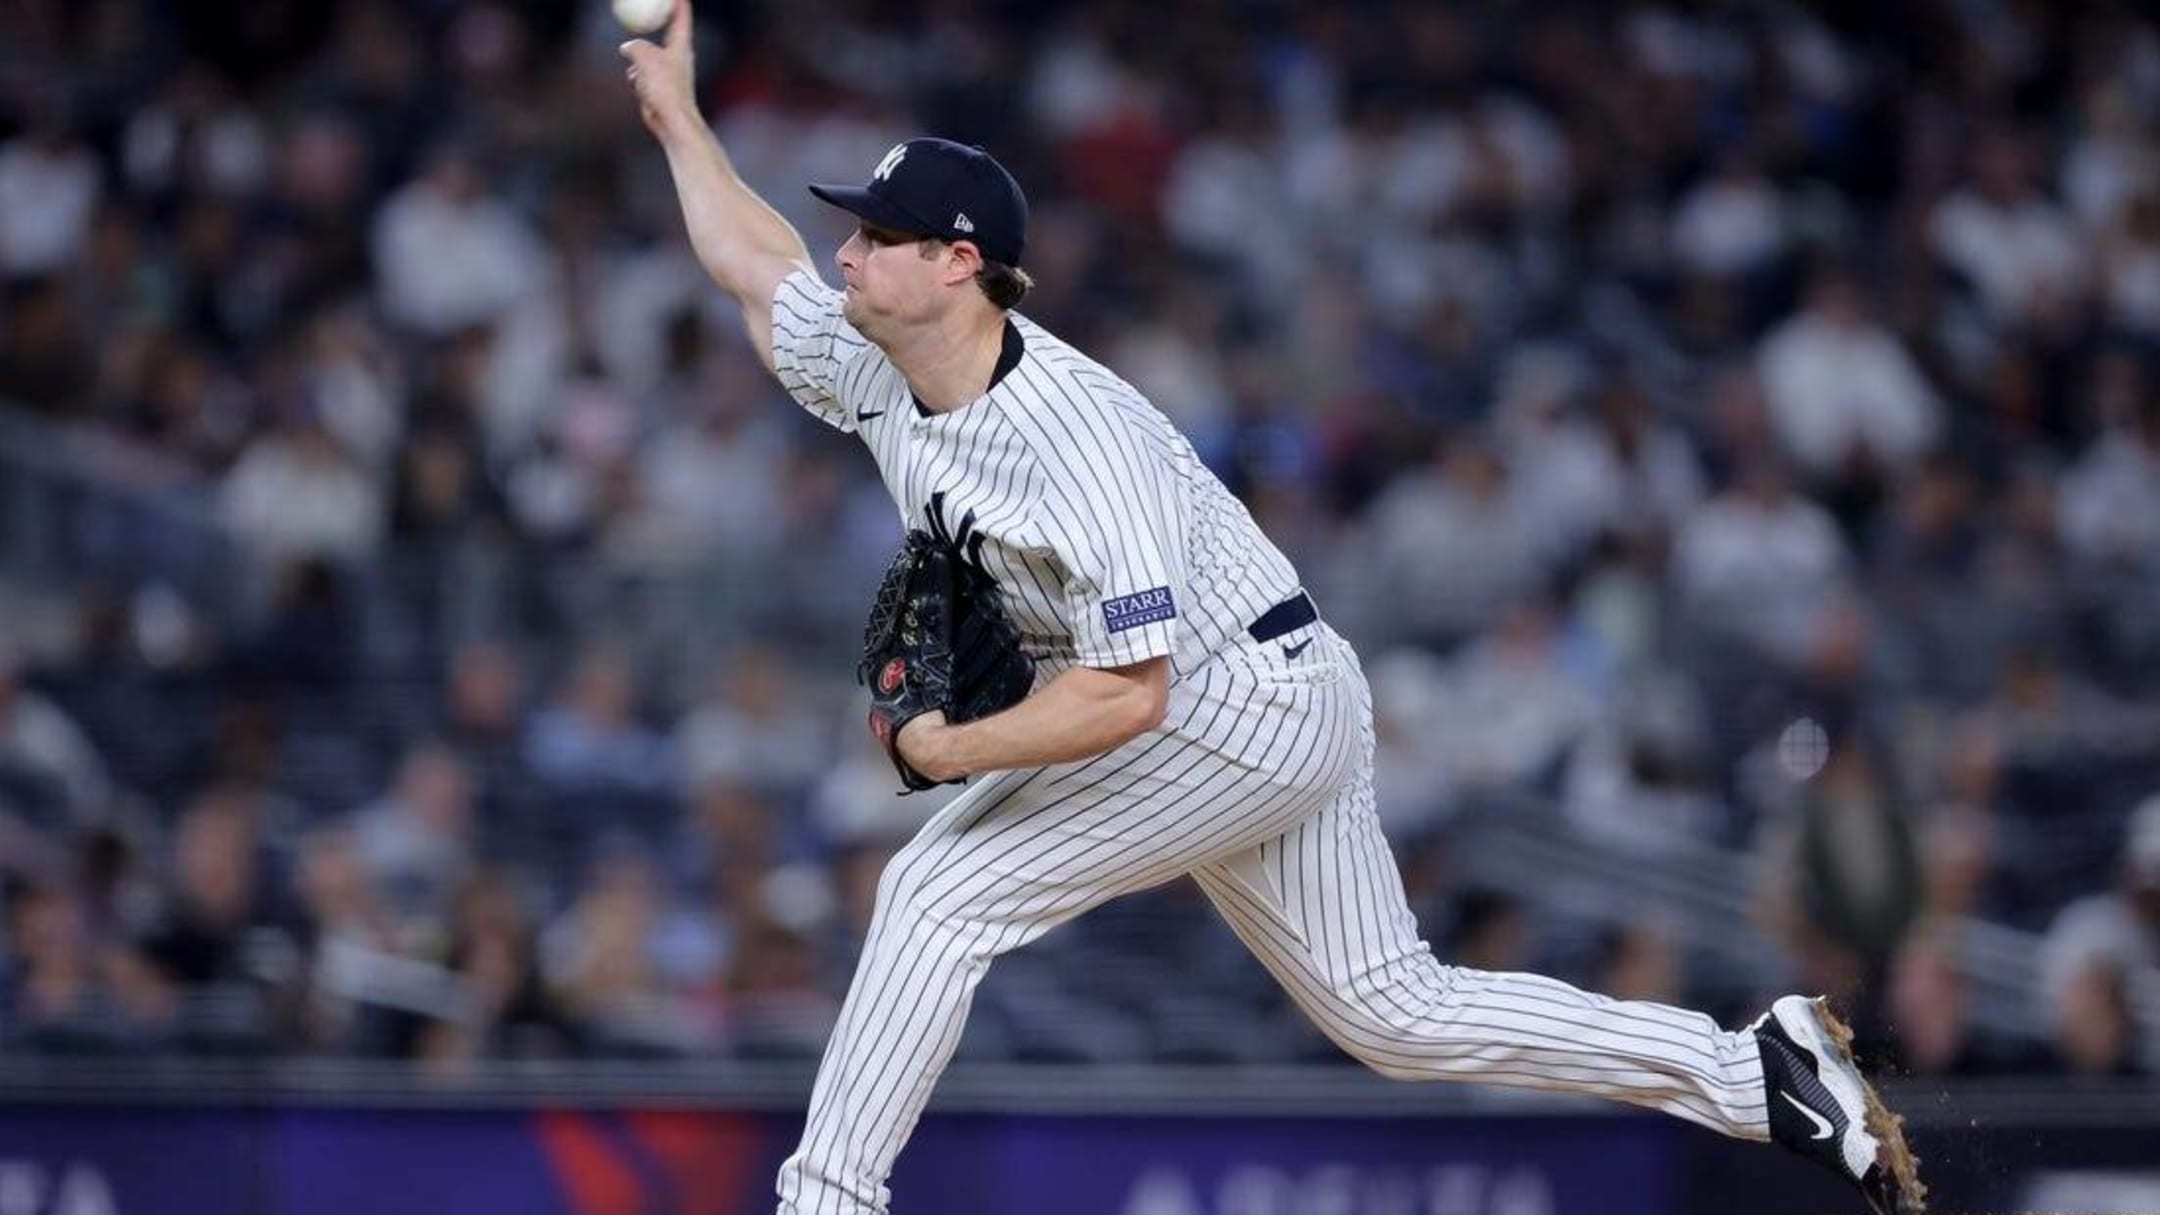 Yankees' Gerrit Cole is MLB Perfect Inning 23 Cover Athlete